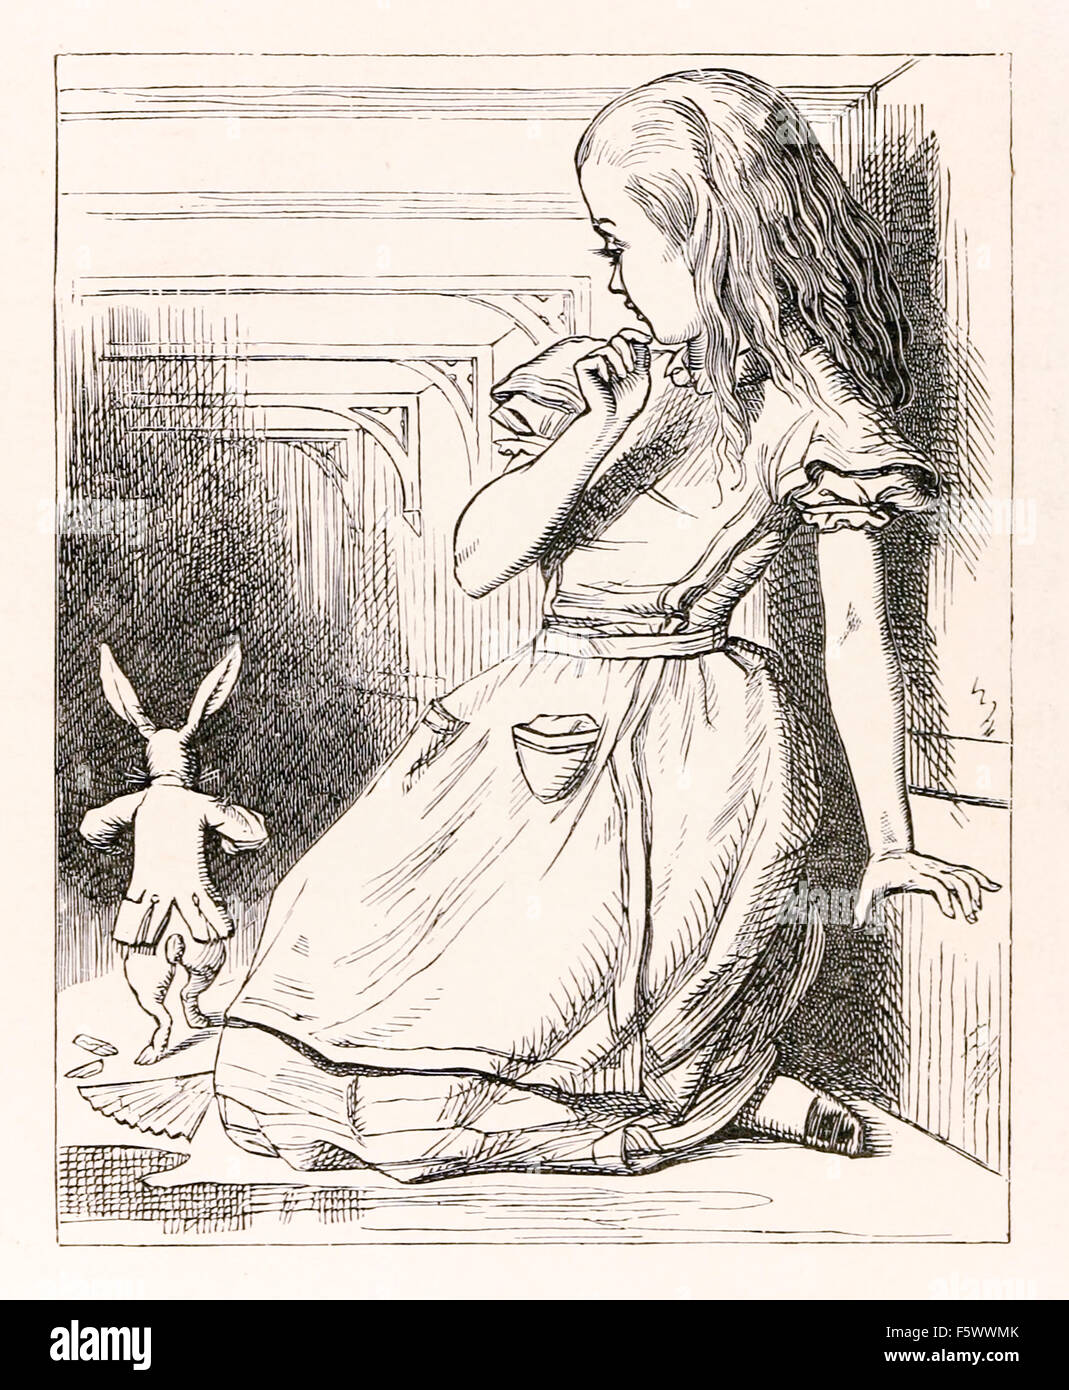 Alice in Wonderland Chapter 2 'The Pool of Tears', an enlarged Alice startles the white rabbit who drops his fan and white kid gloves. Photograph from a 1888 edition of the book ‘Alice’s Adventures in Wonderland’ published by Macmillan & Co. Credit: Private Collection / AF Fotografie Stock Photo